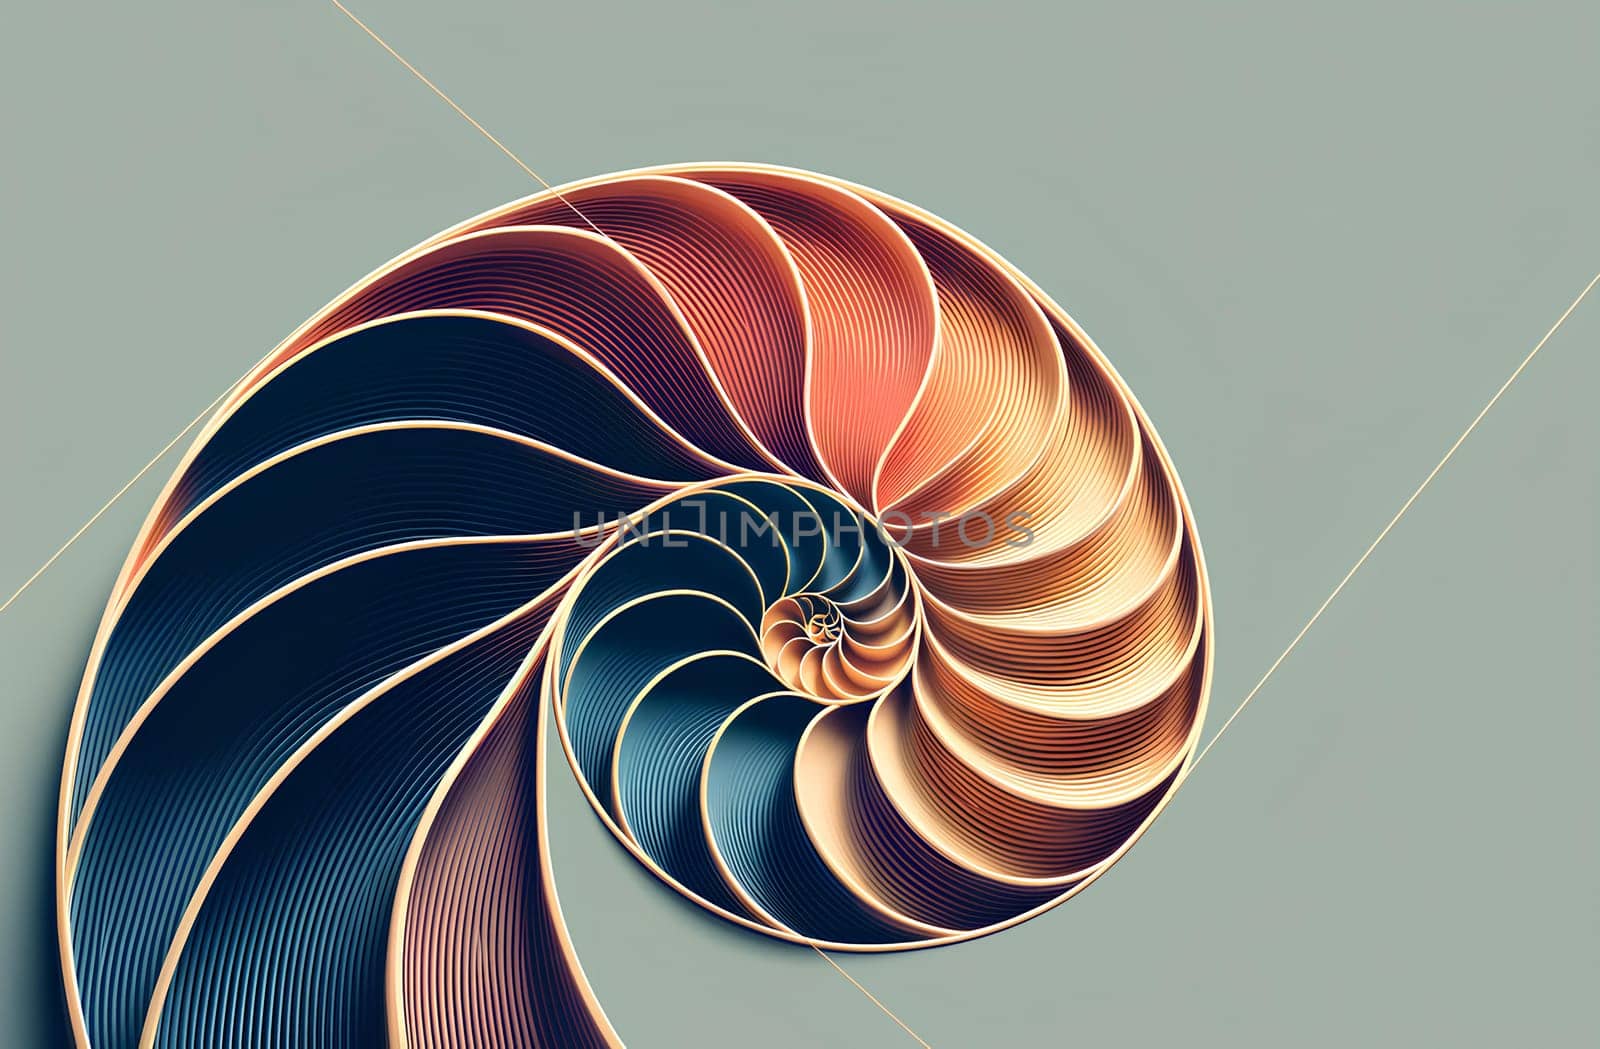 Spiral Fibonacci pattern in different tones with plenty of copy space on a gray background by Annado